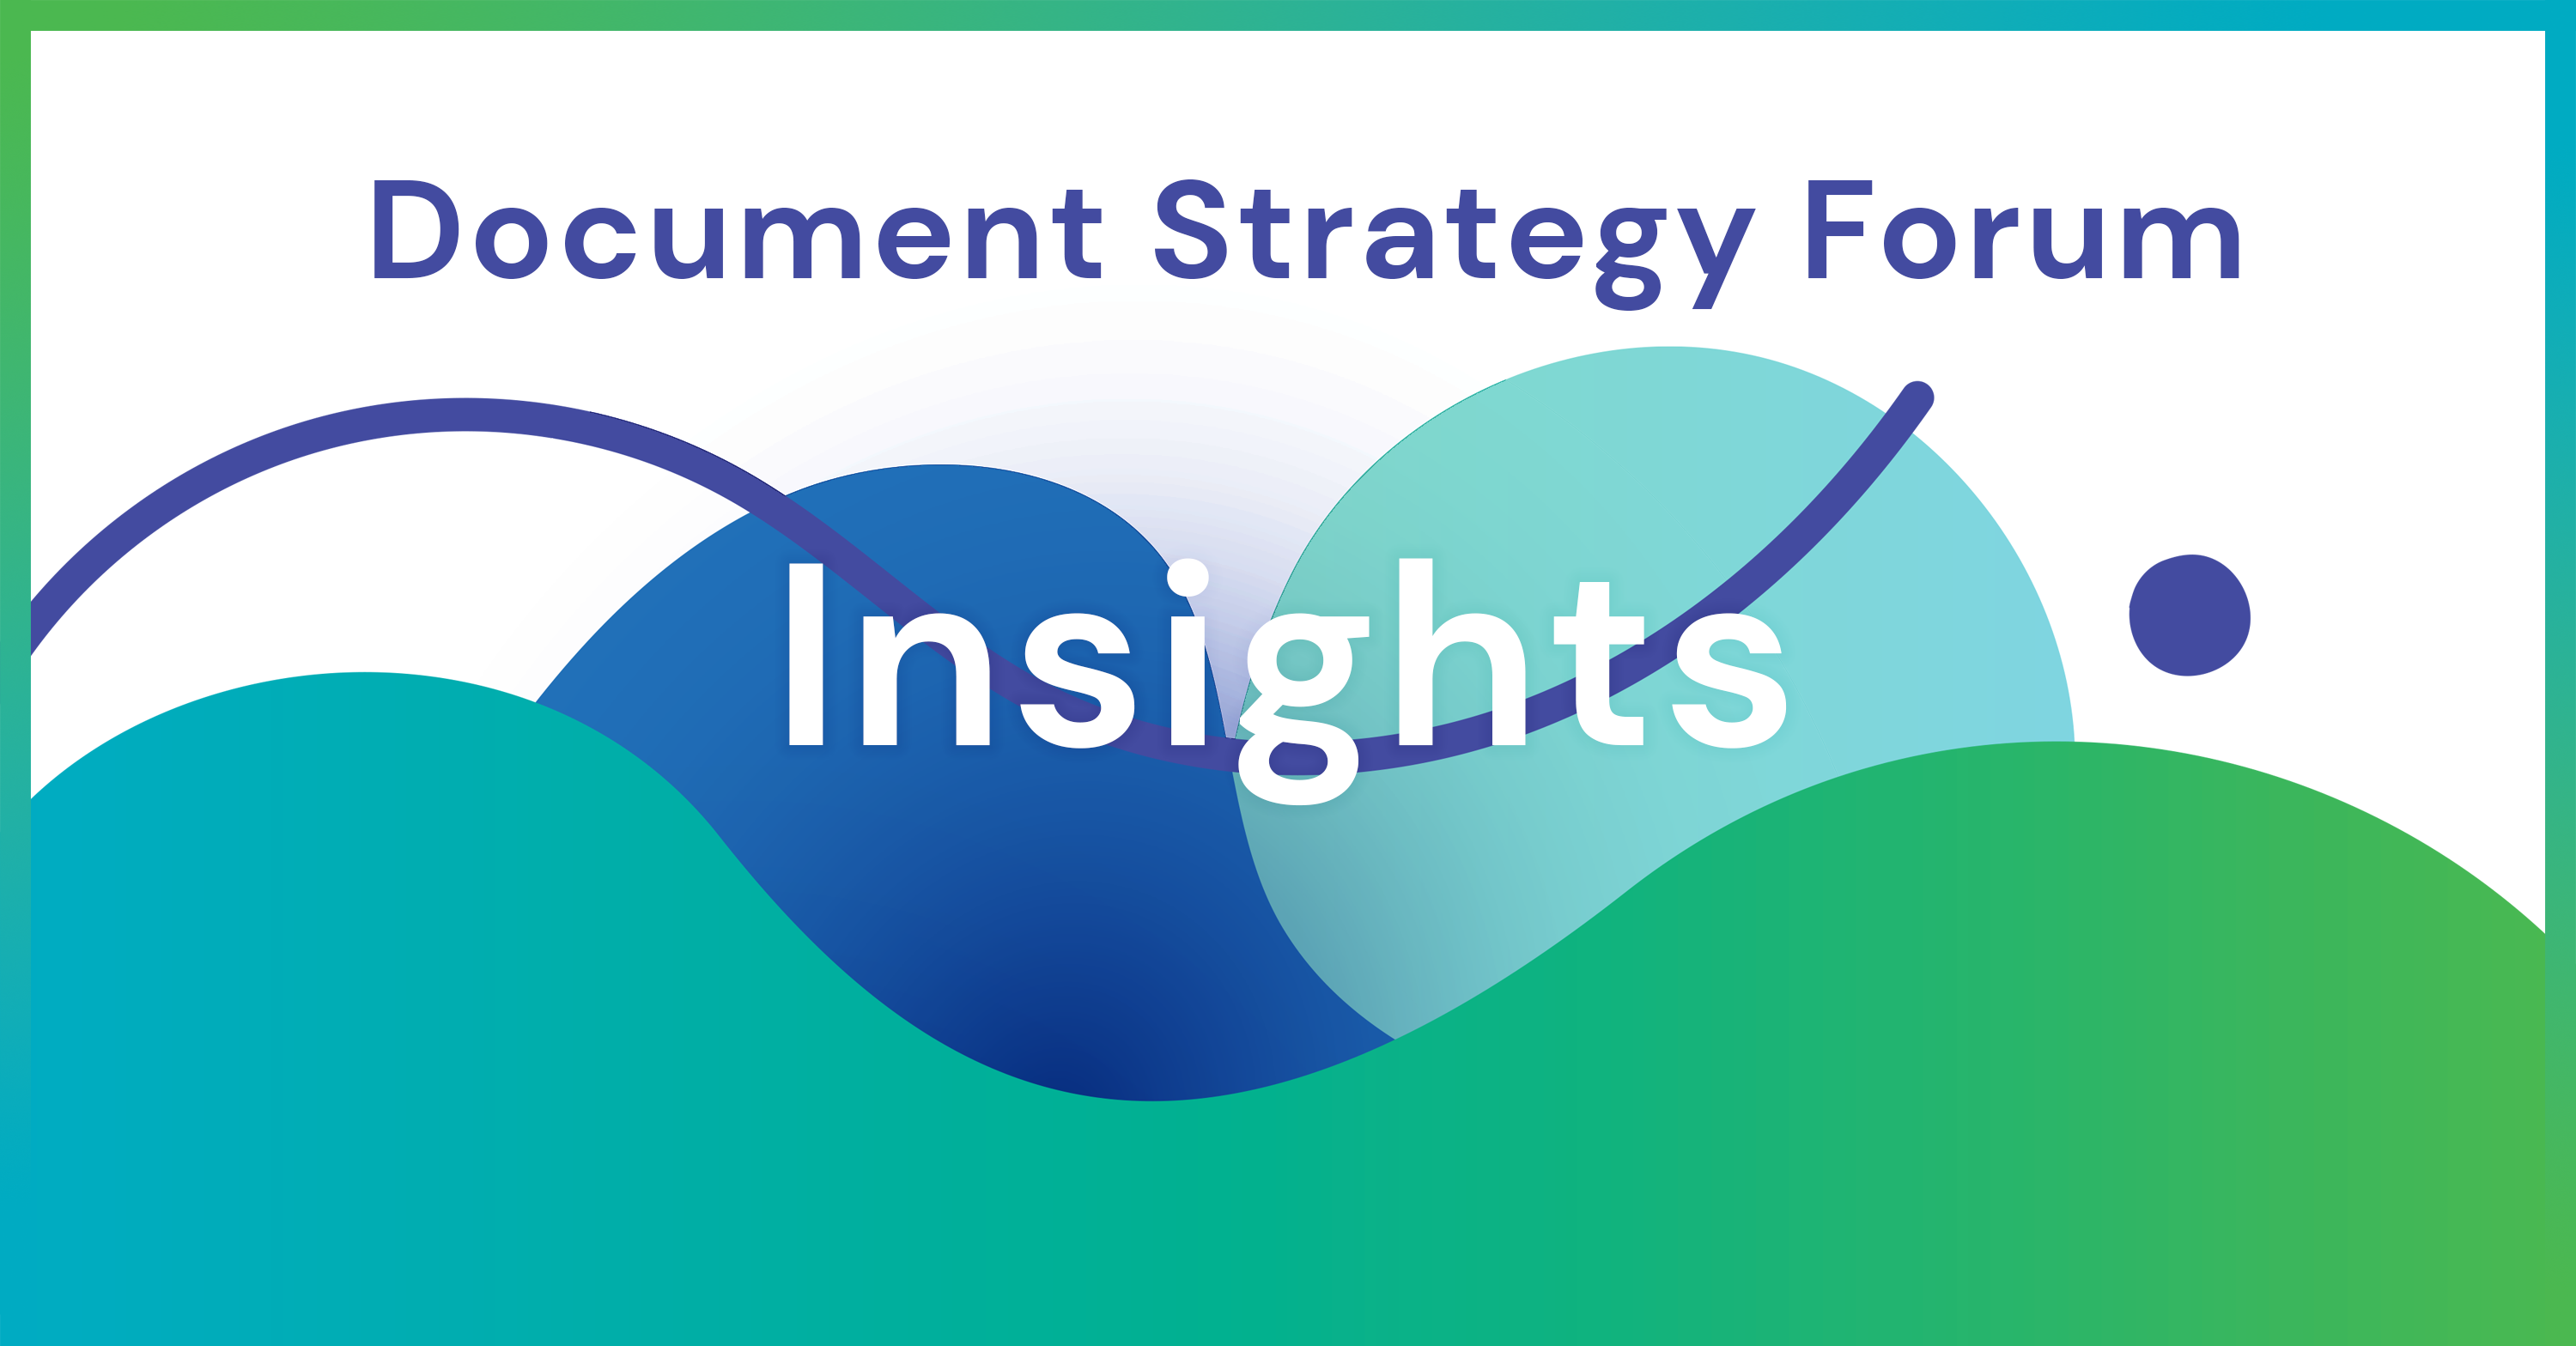 Document Strategy Insights on a background of blue and green blobs with a dark blue wavy line